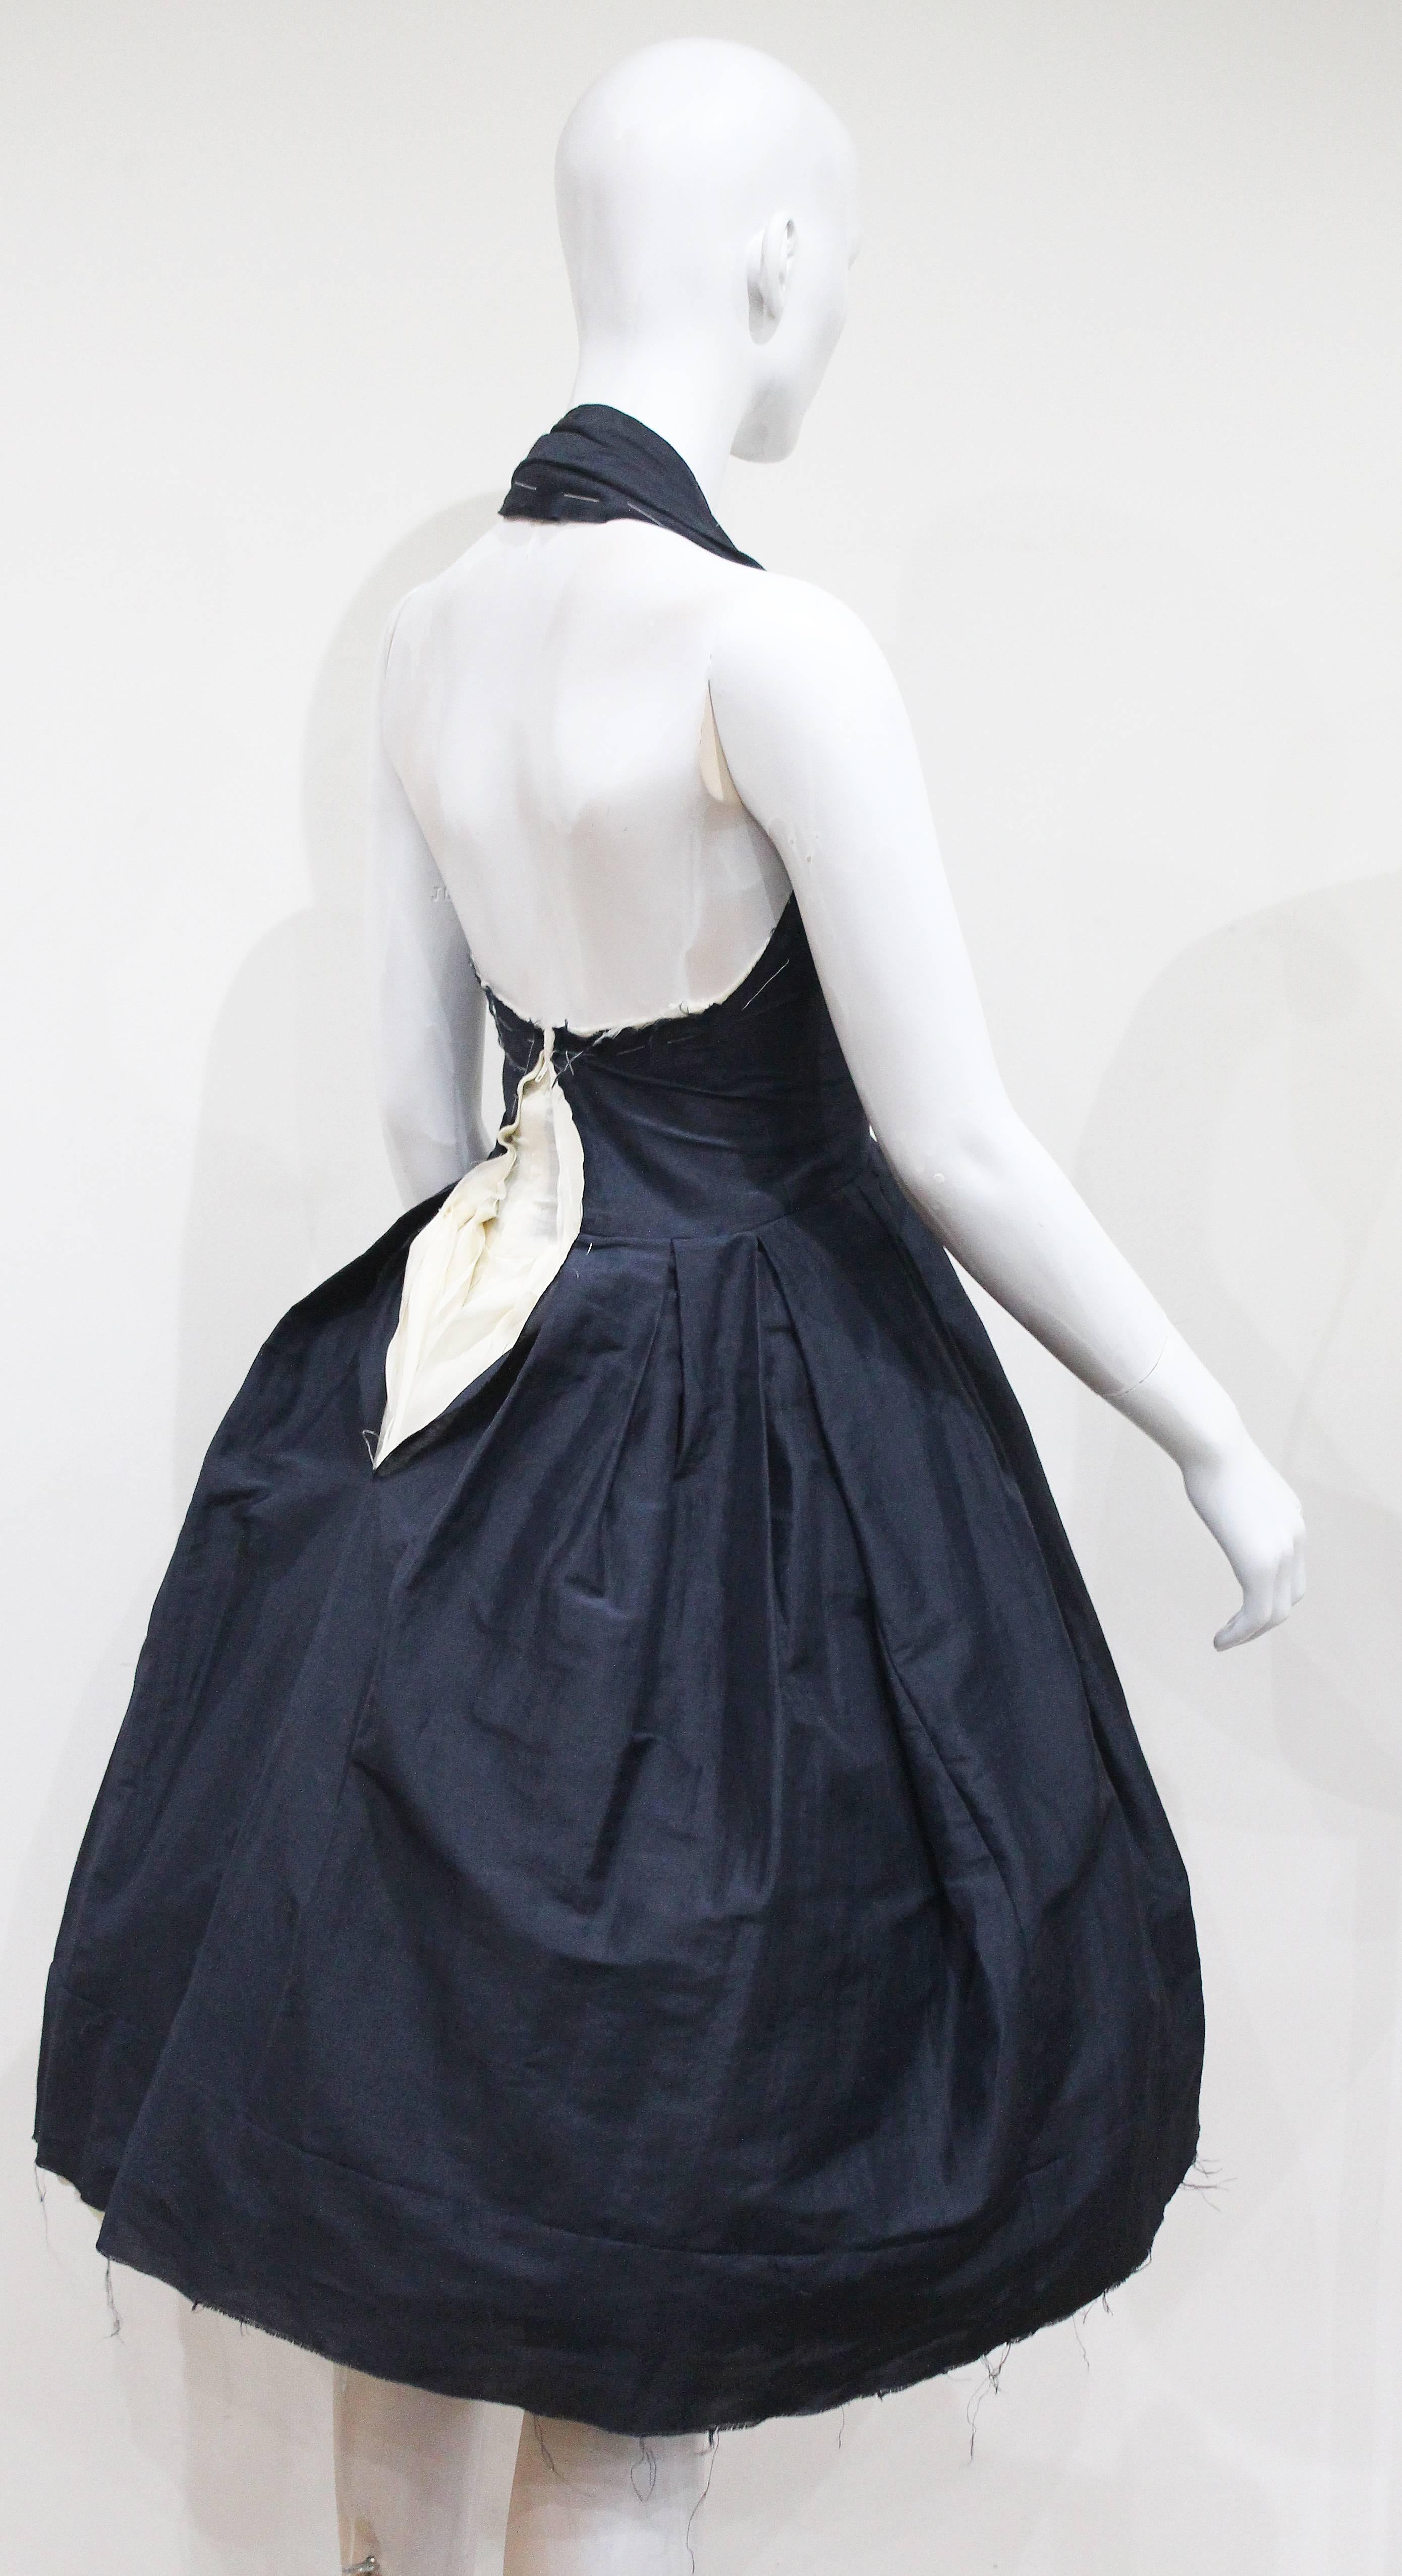 A COMME des GARCONS by Rei Kawakubo de-constructed marine blue halter neck dress with five off-white cotton underskirts, made in the year 1997 for the Spring/Summer 1998 season. The dress has a raw, frayed and uneven finish, balloon layered skirt